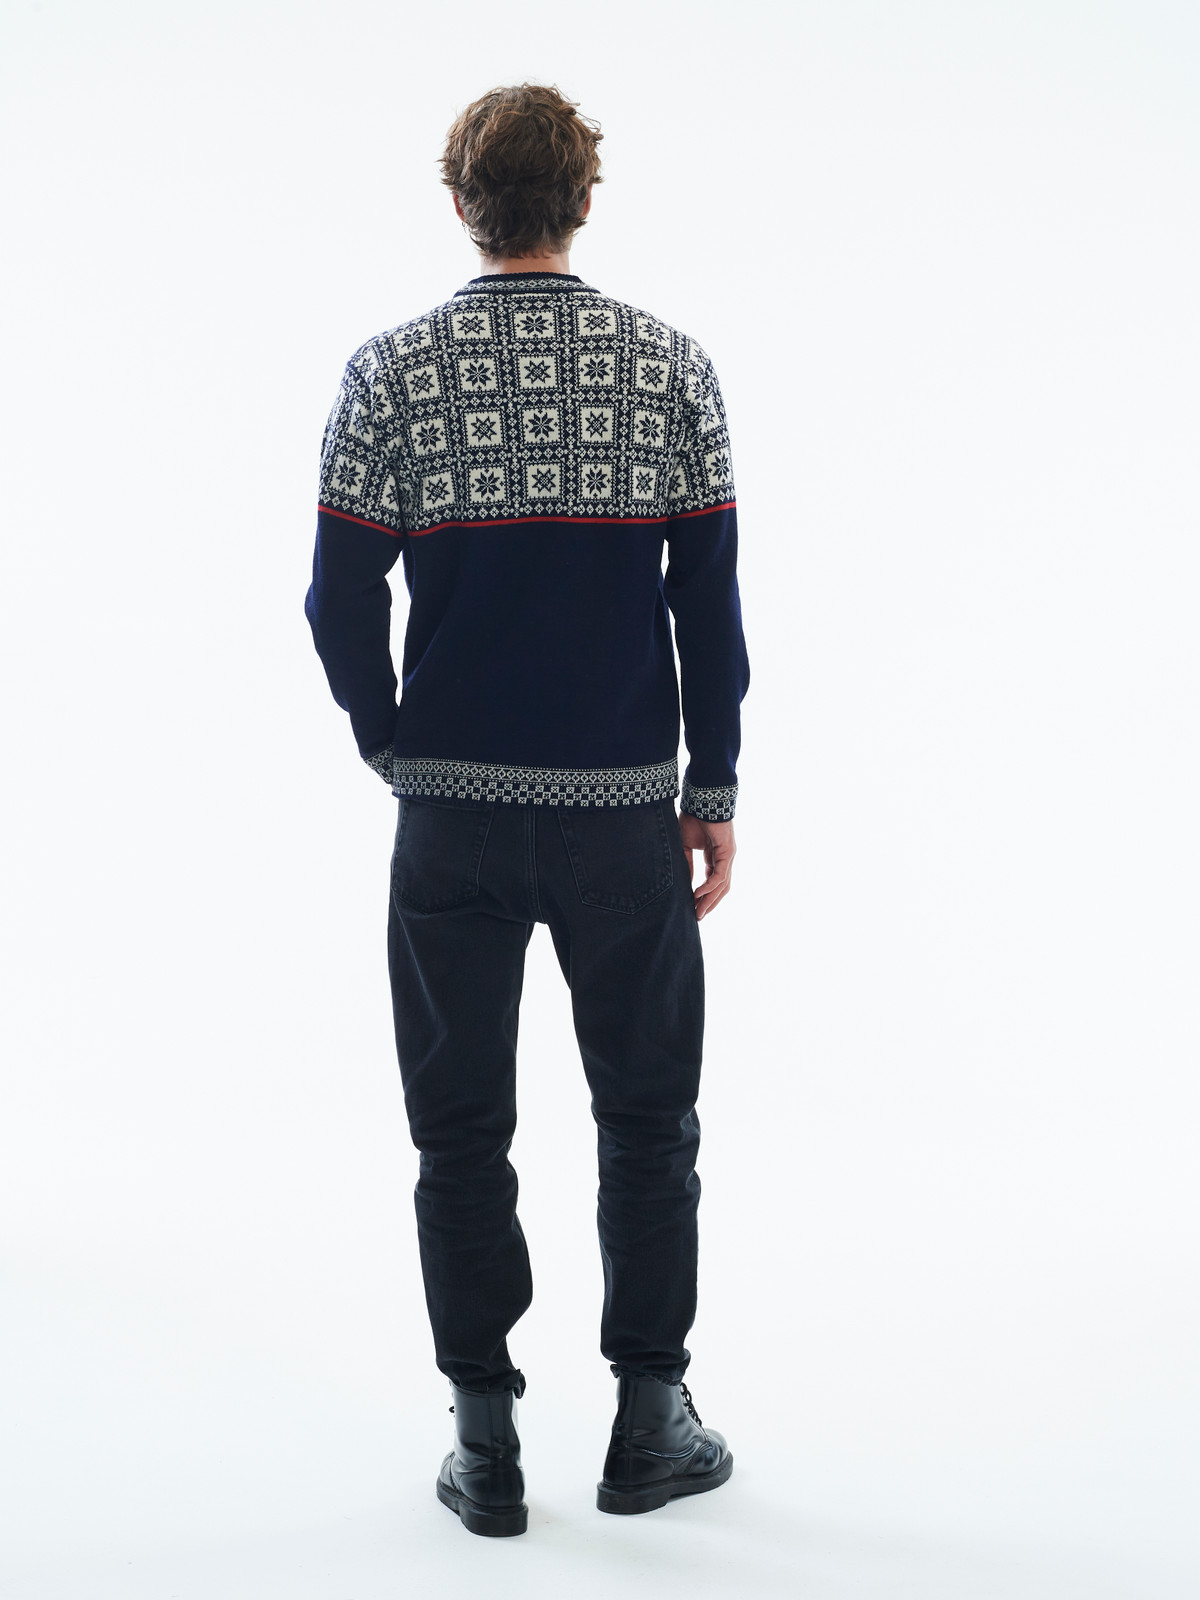 Dale of Norway - Tyssoy Men's Sweater: Navy/Off White/Raspberry, 94411 ...